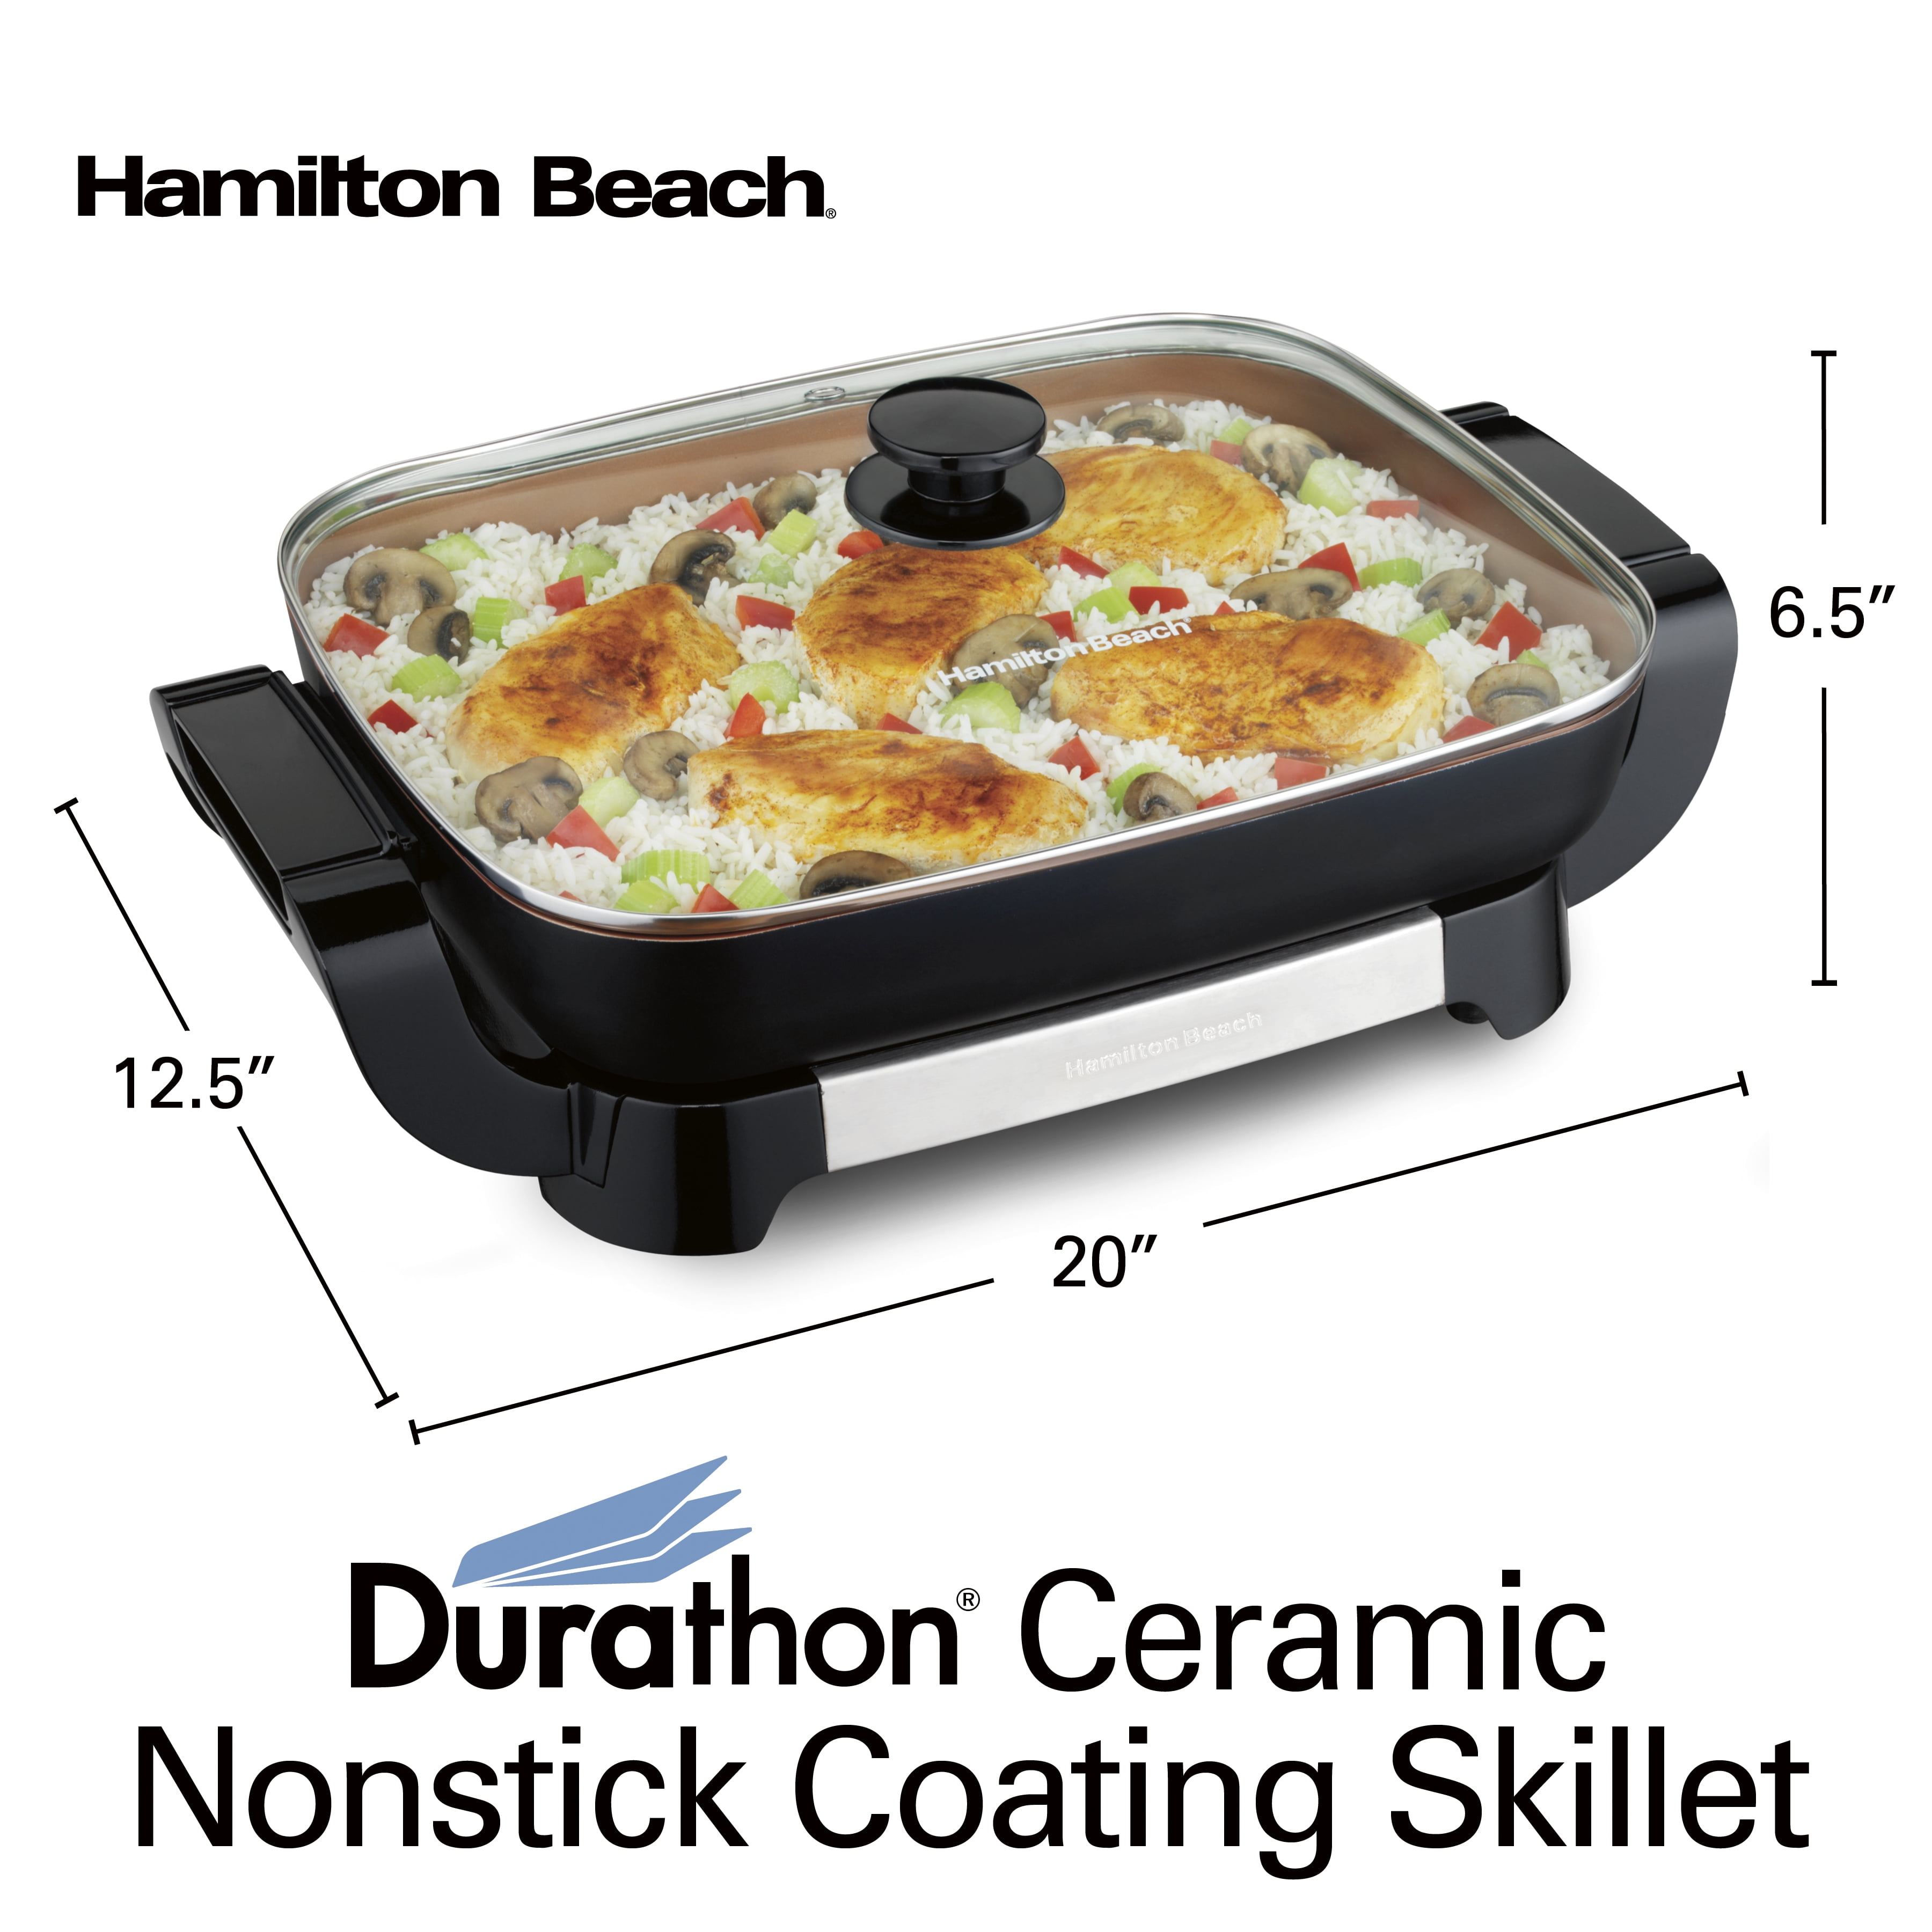 CRUX Electric Skillet with Glass Lid - Nonstick Scratch Resistant Ceramic  Pan, Extra Deep with Removable Temperature Probe, 12 x 12, 1400 Watts